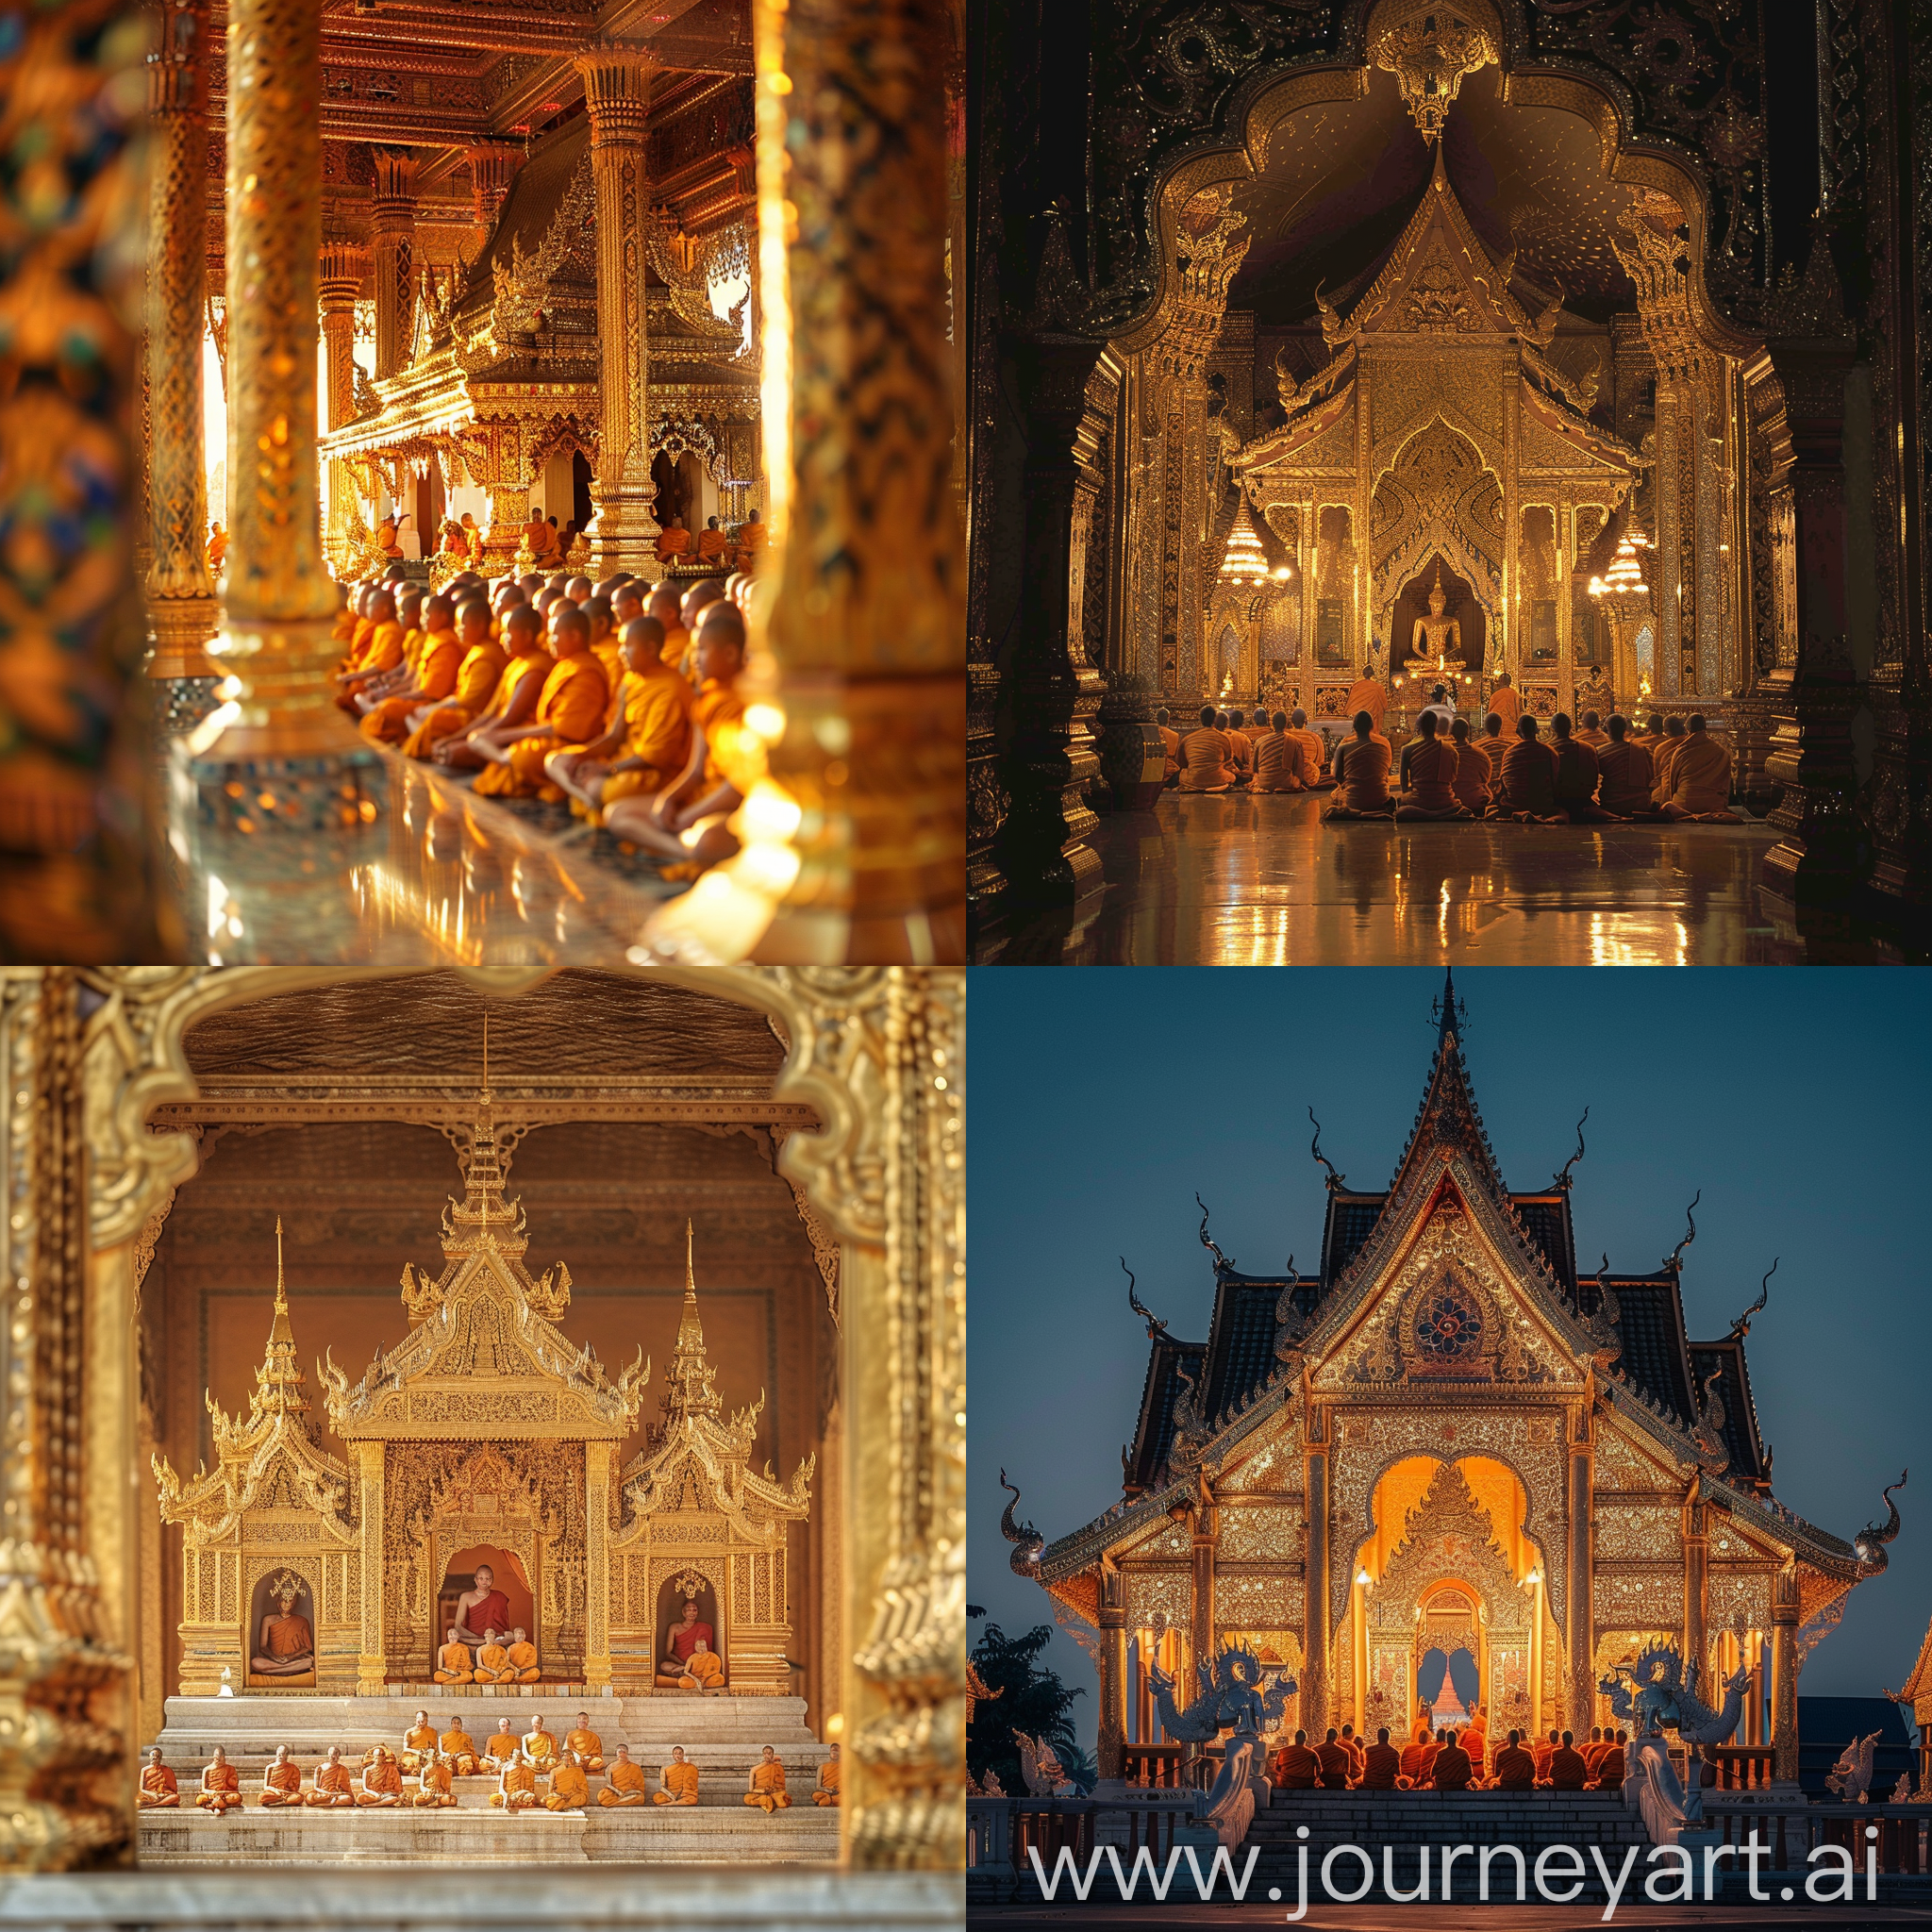 During the day, temples in Thailand are glittering golden churches with monks gathered inside.